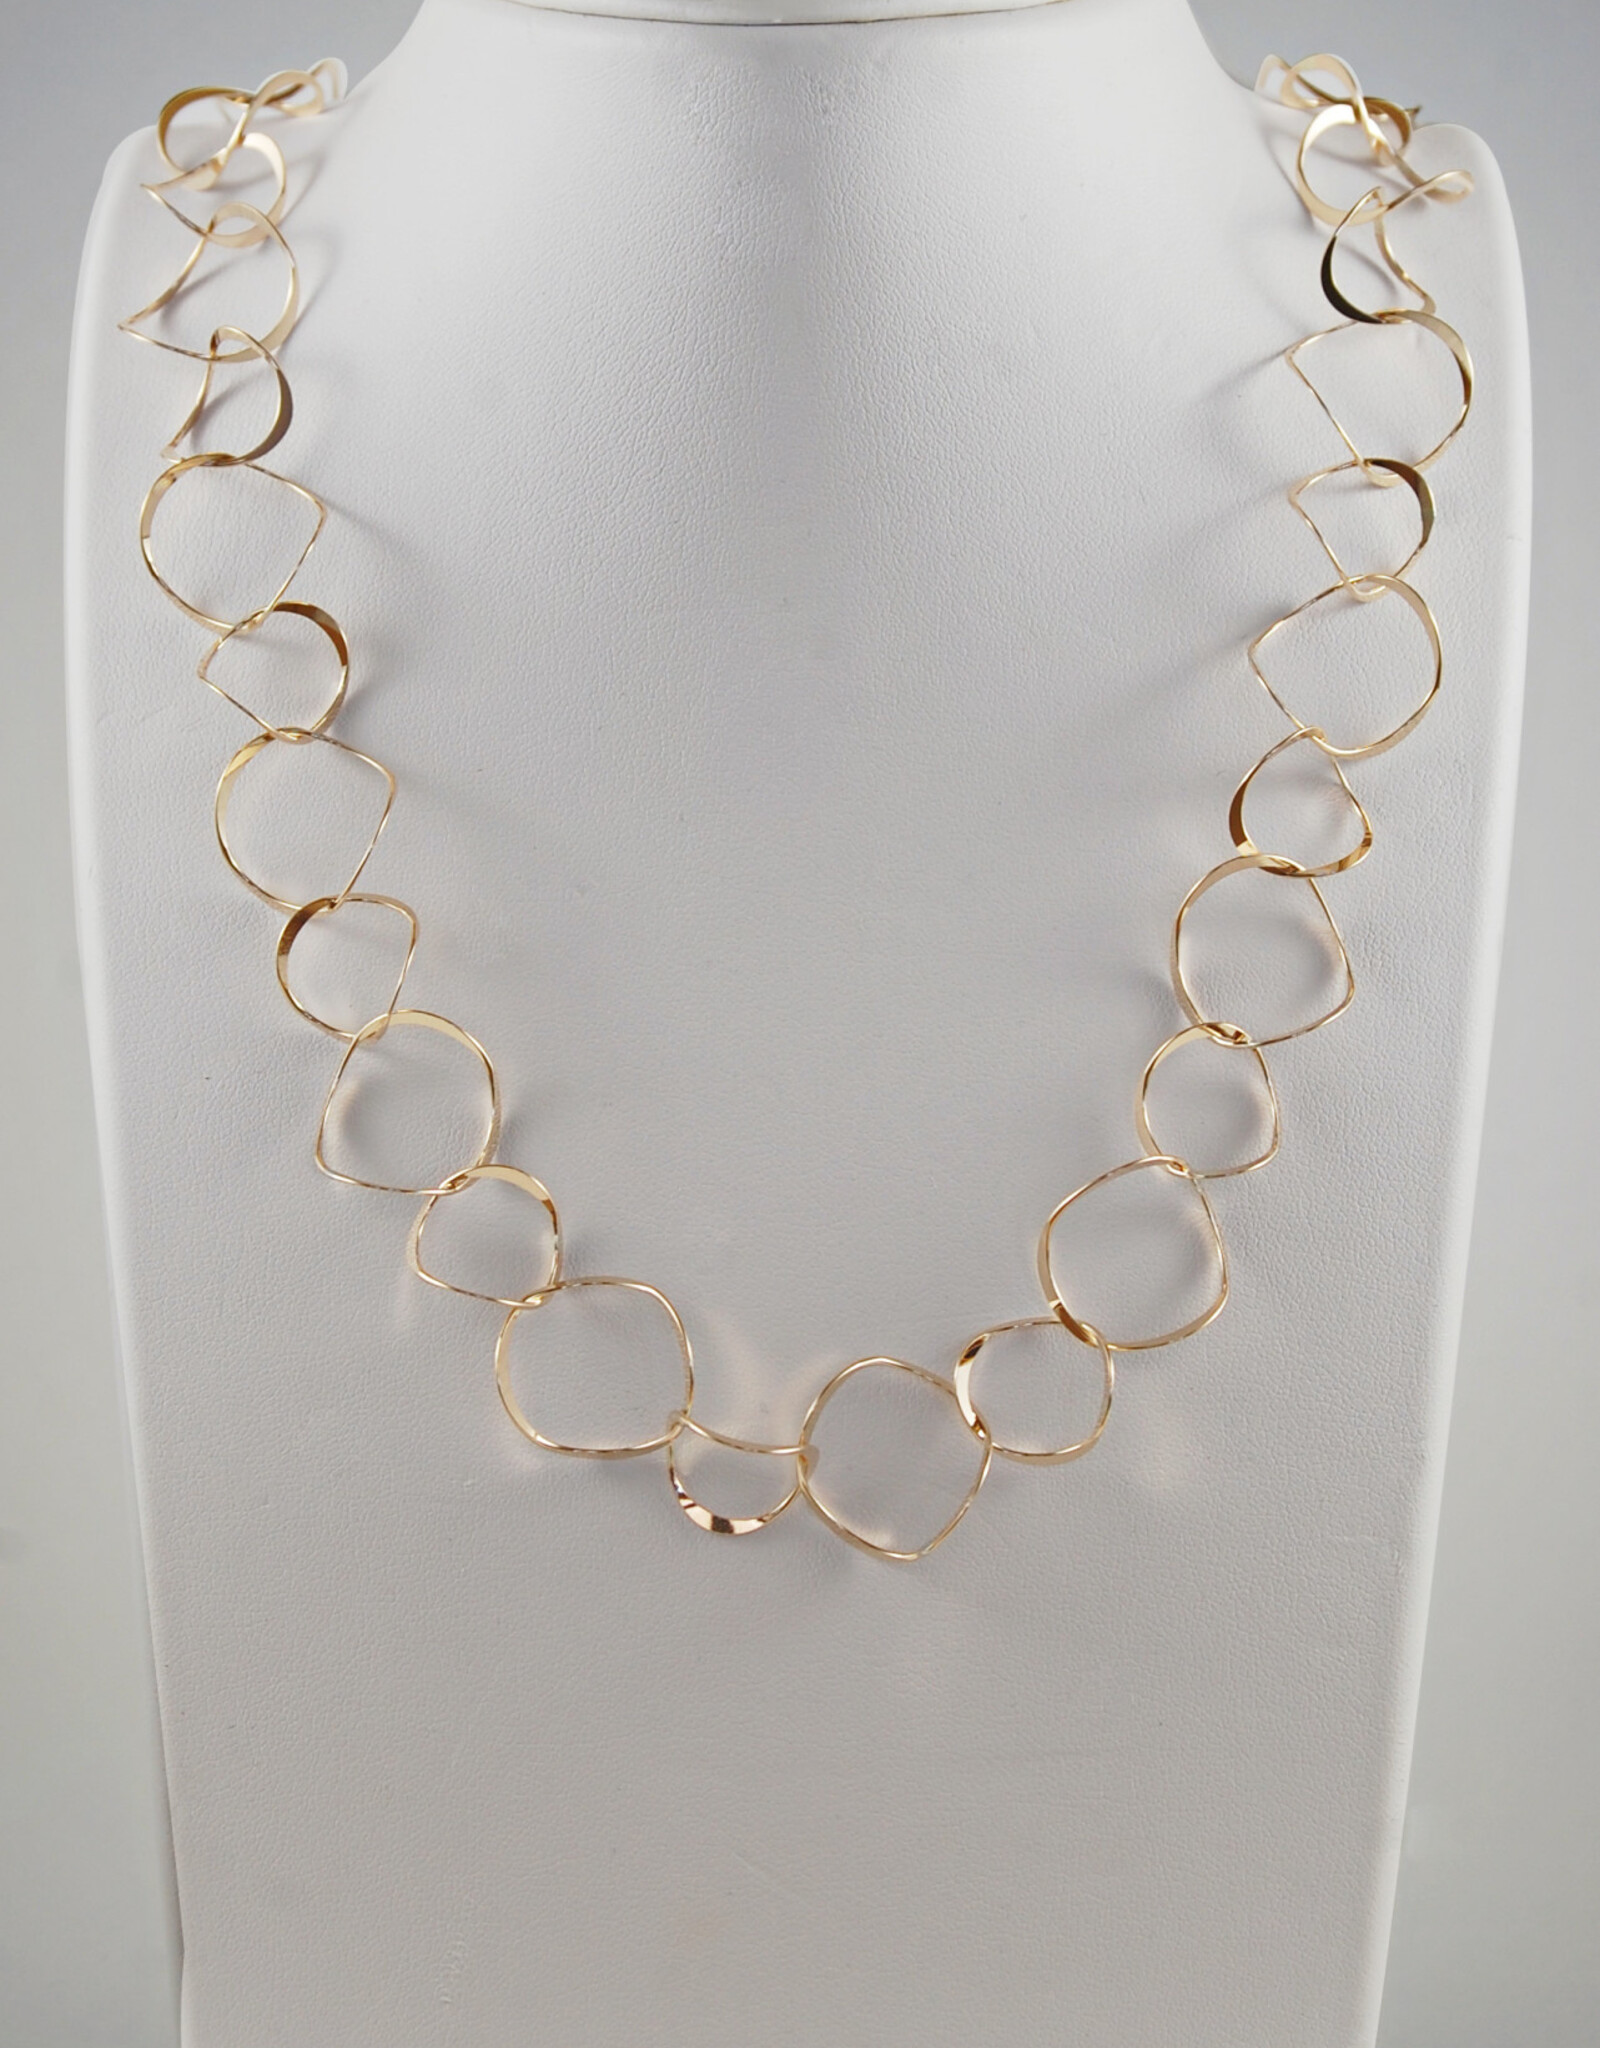 B&R Designs by Nilsson Gold-filled Wobble Necklace #NK4G 18"